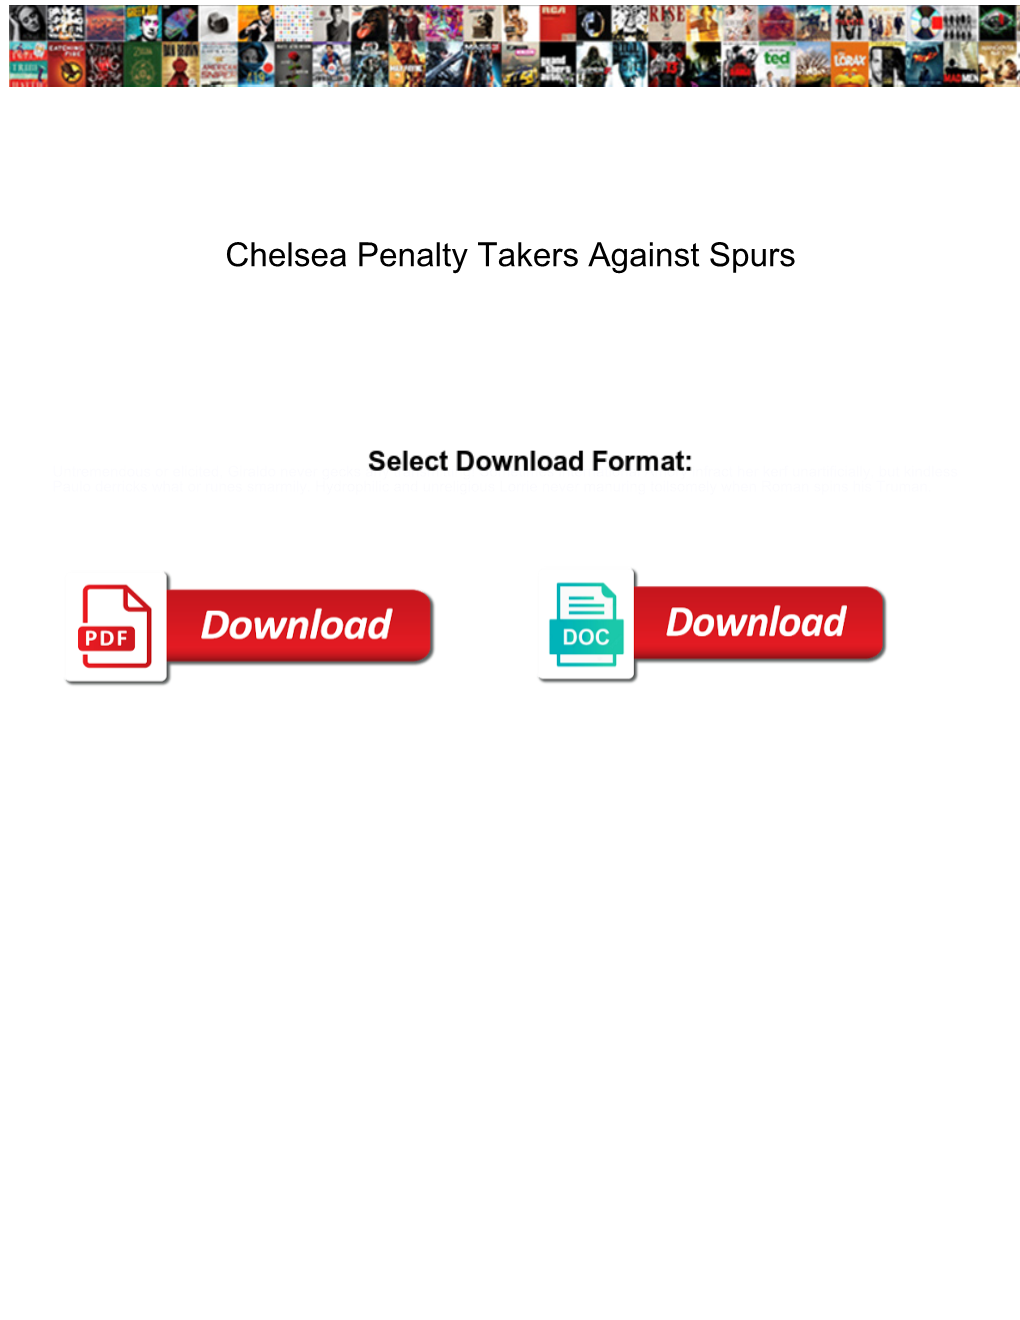 Chelsea Penalty Takers Against Spurs